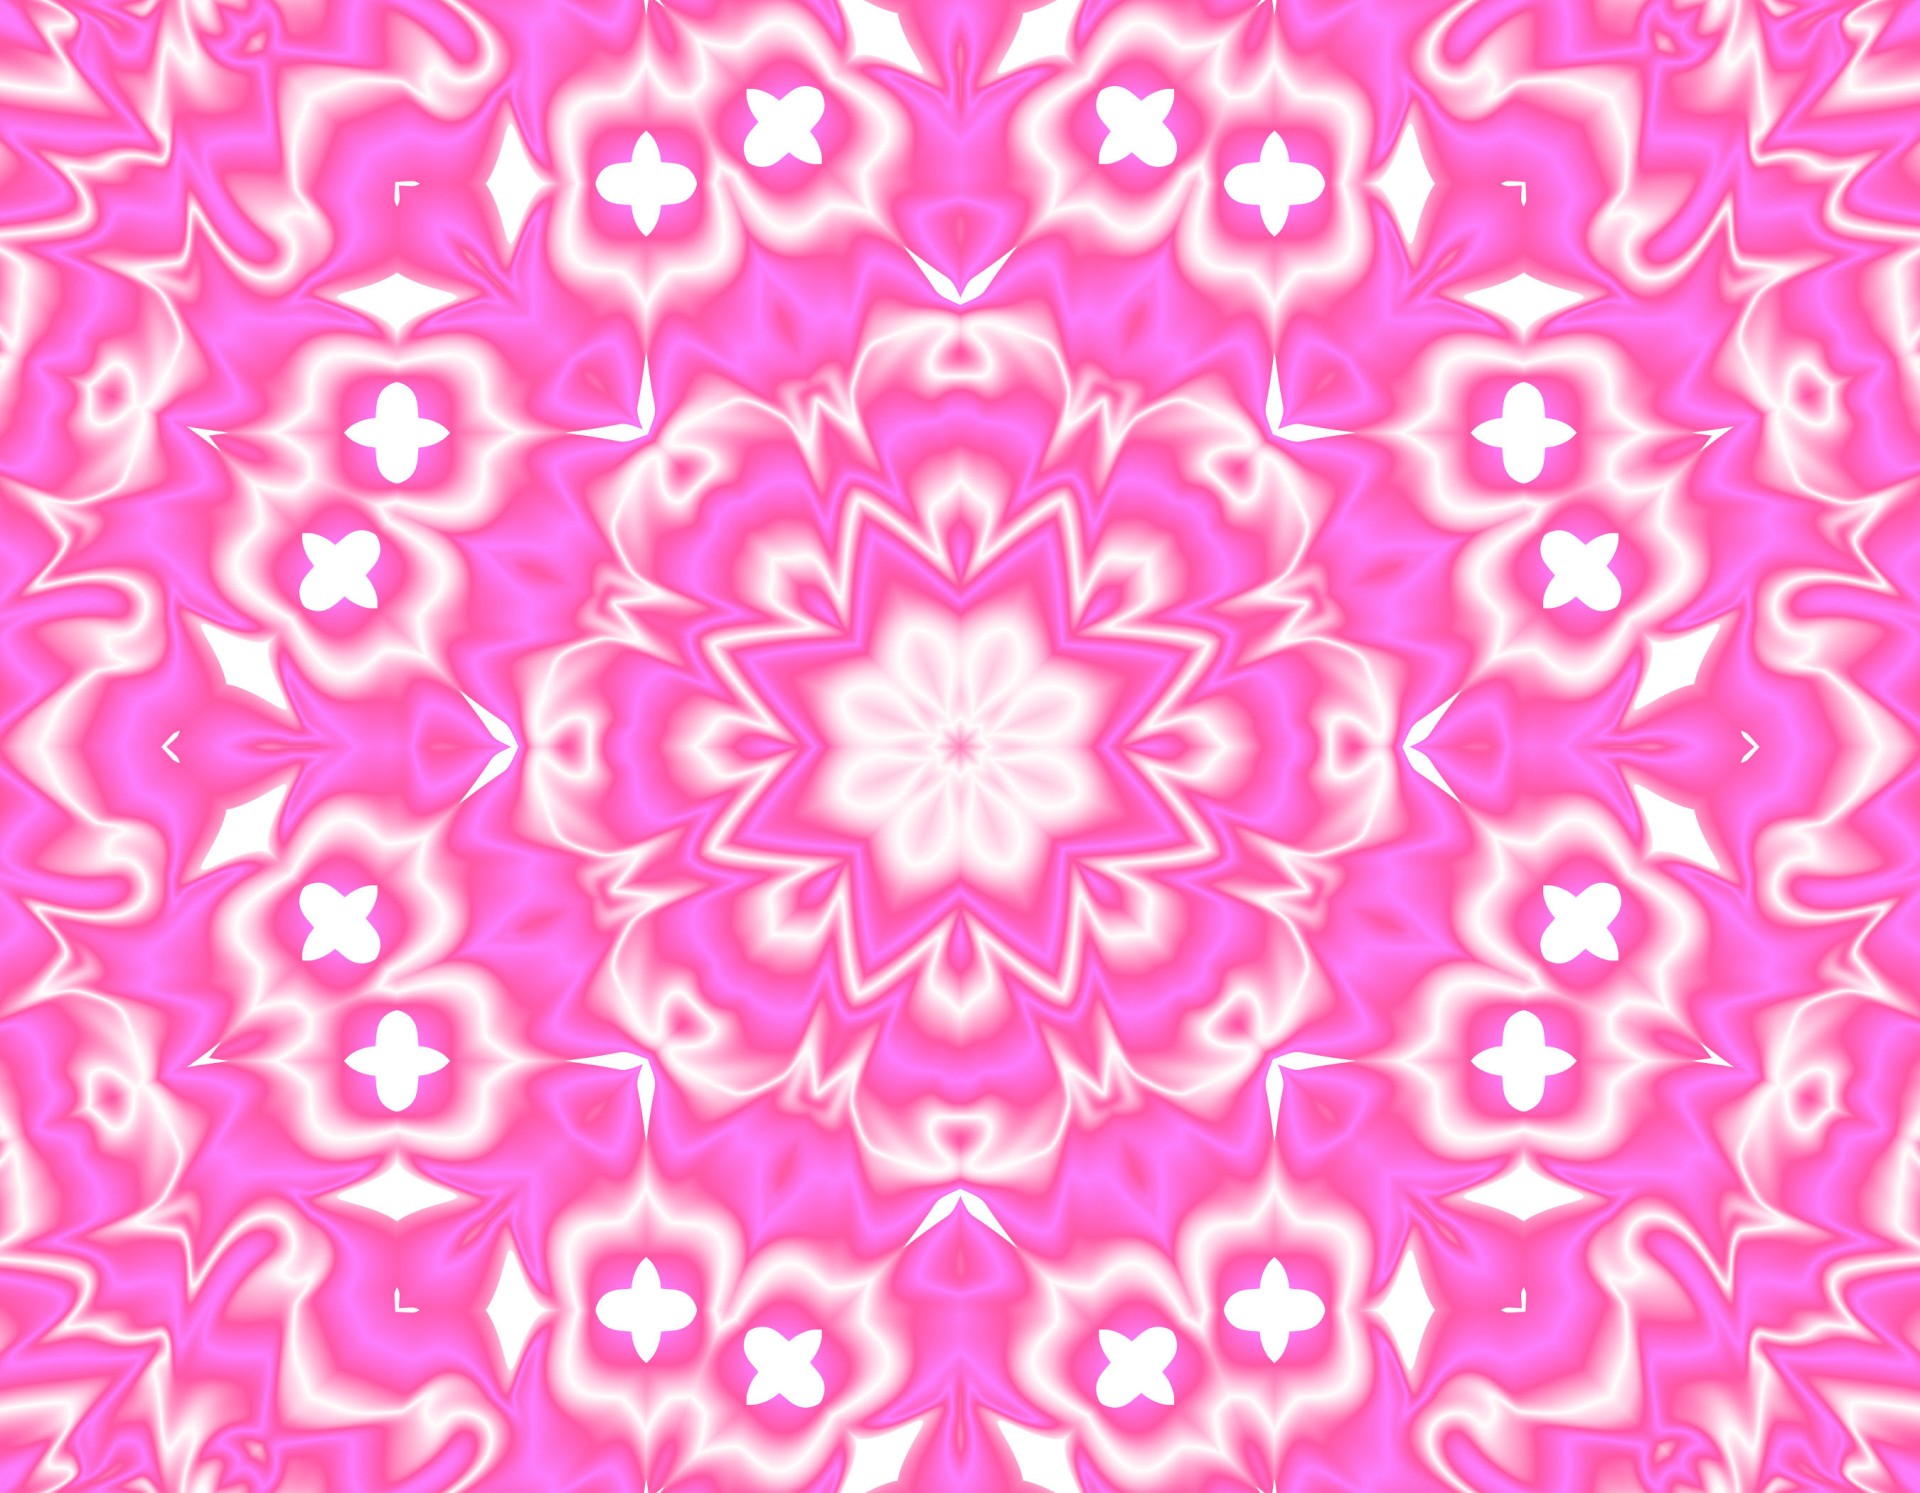 Made with Photoshop Elements 7 and a kaleidoscope plug in